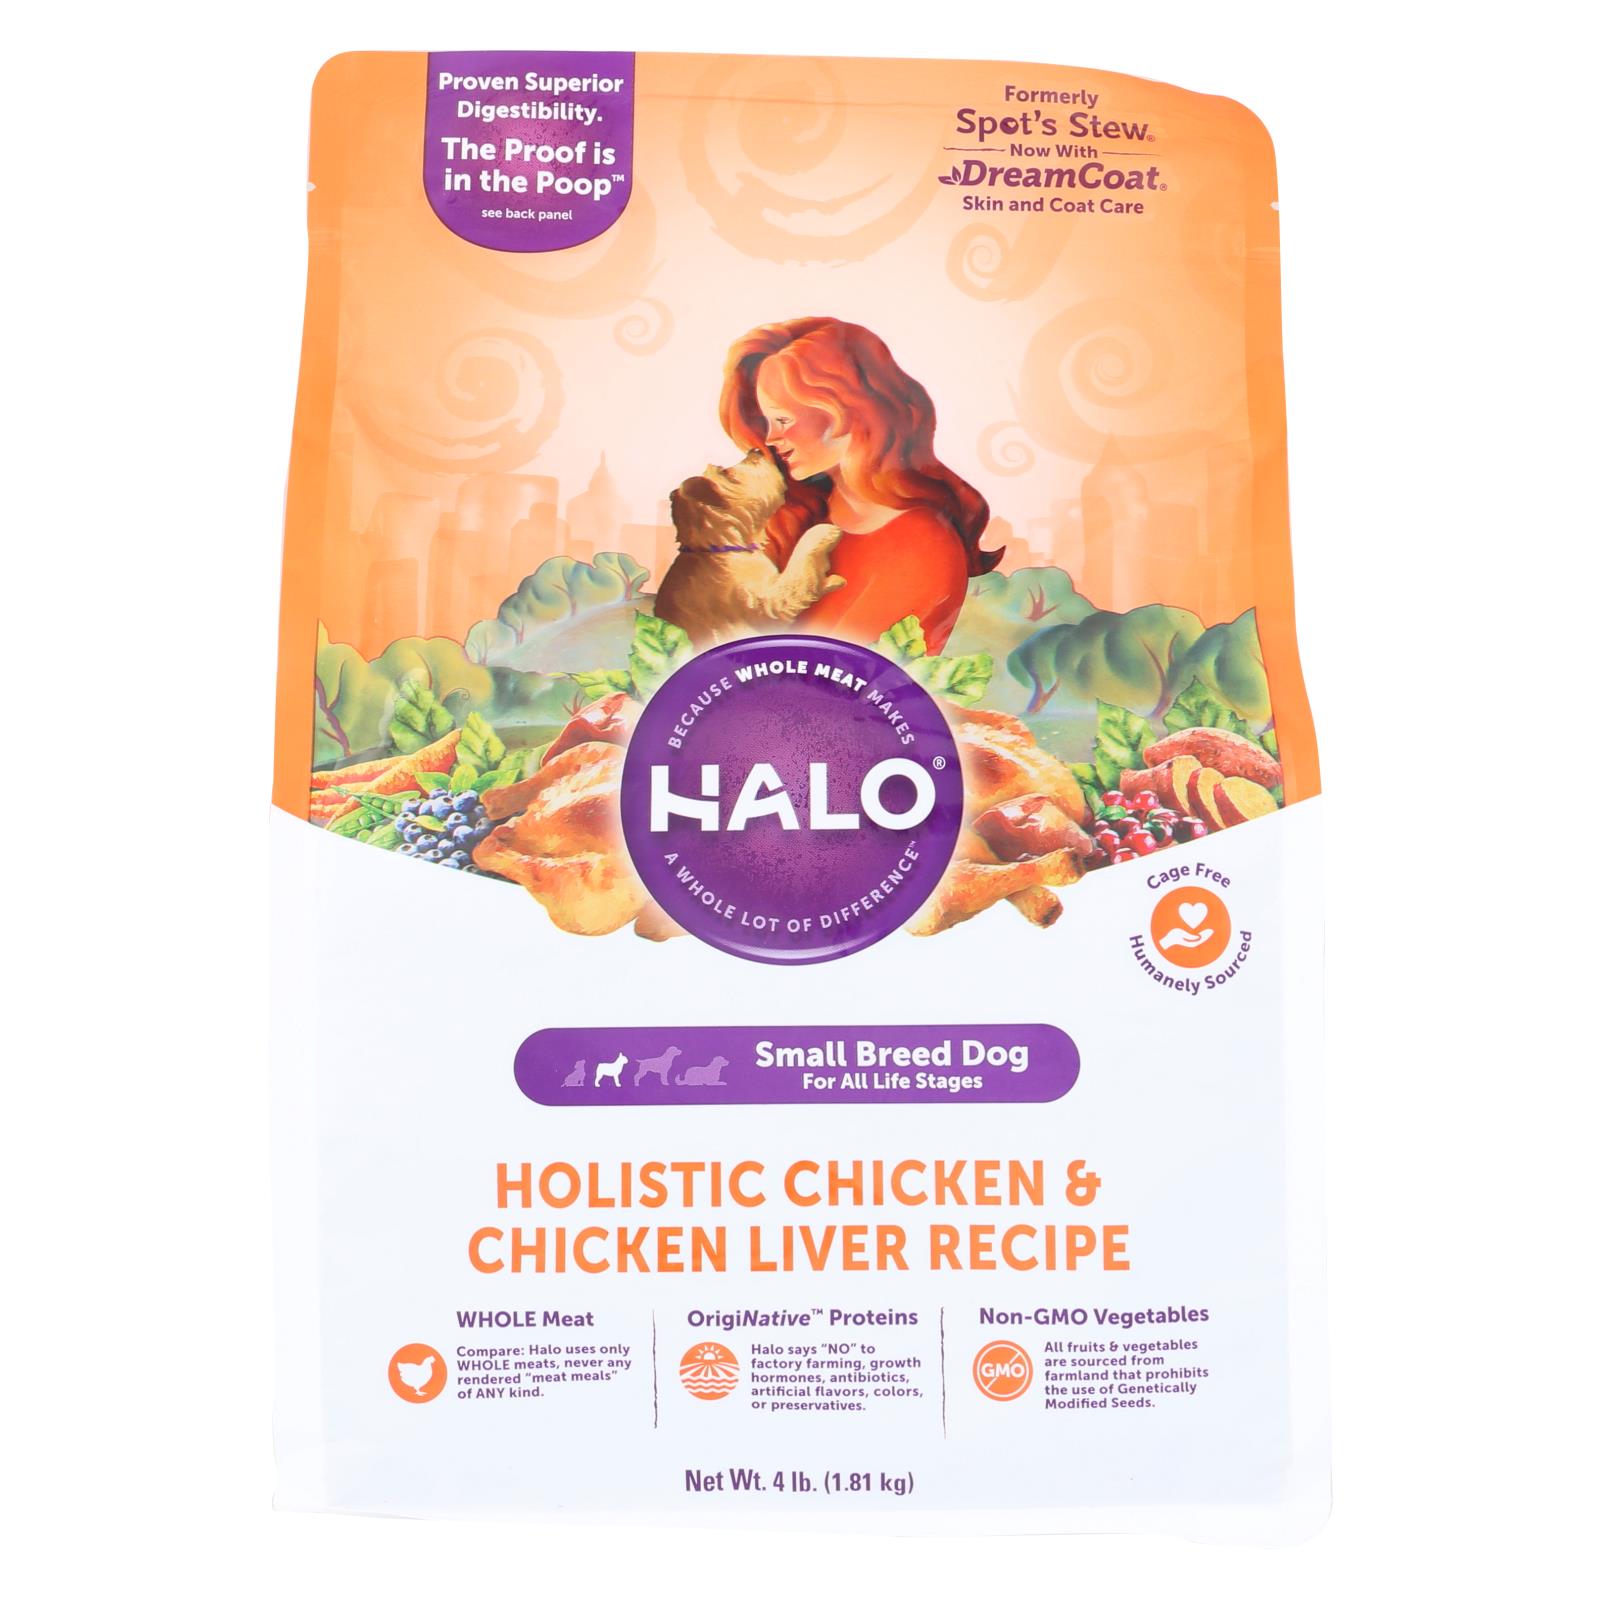 Halo, Purely For Pets Small Breed, Holistic Chicken & Chicken Liver Recipe - 5개 묶음상품 - 4 LB